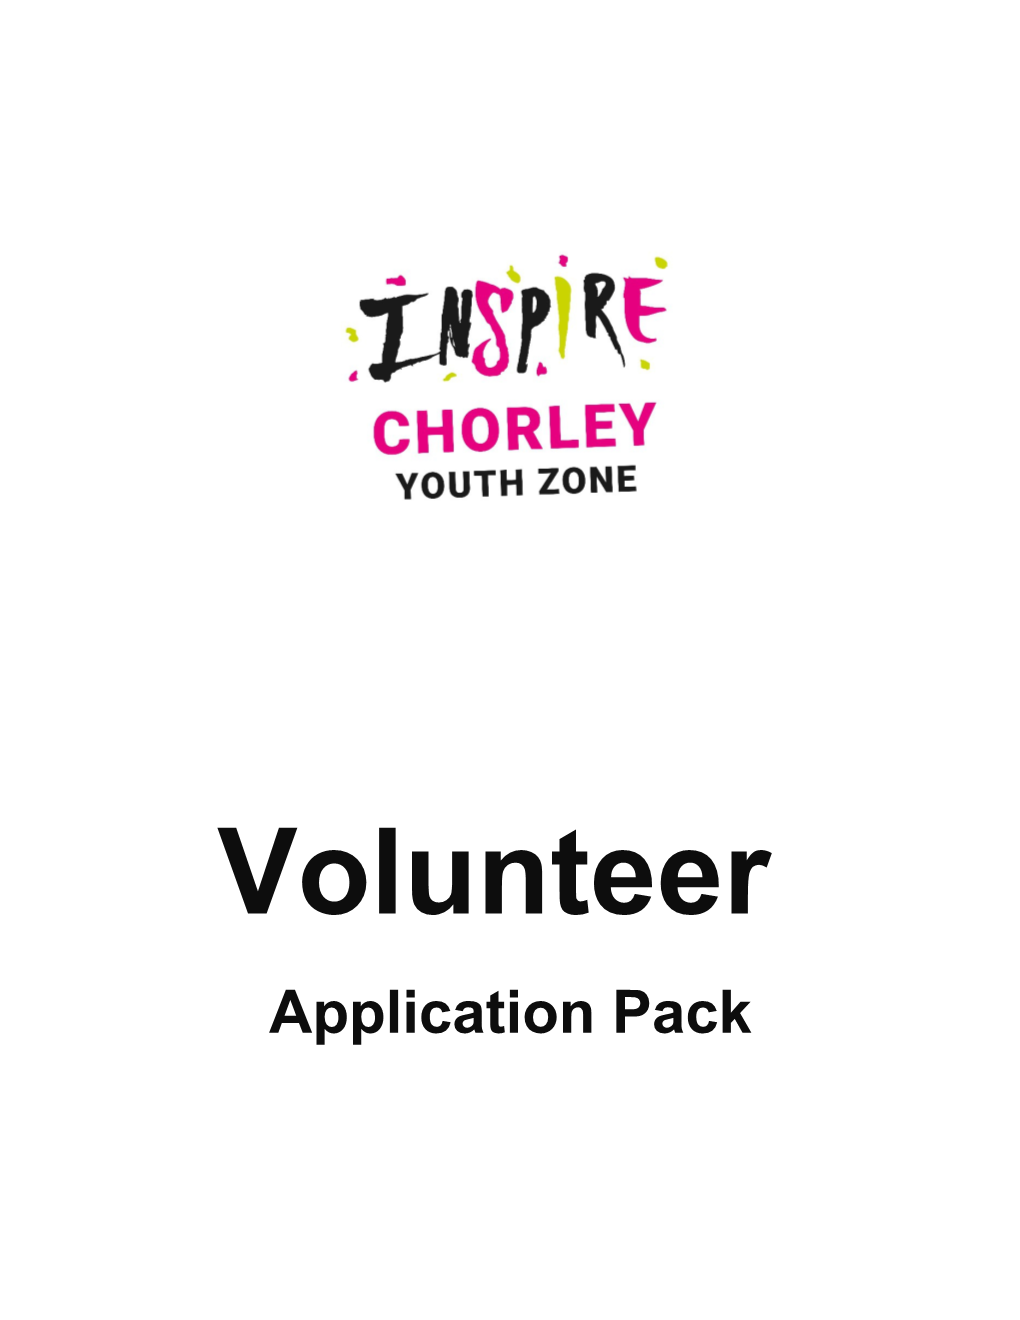 Thank You for Your Interest in Volunteering with Us at Inspire Youth Zone